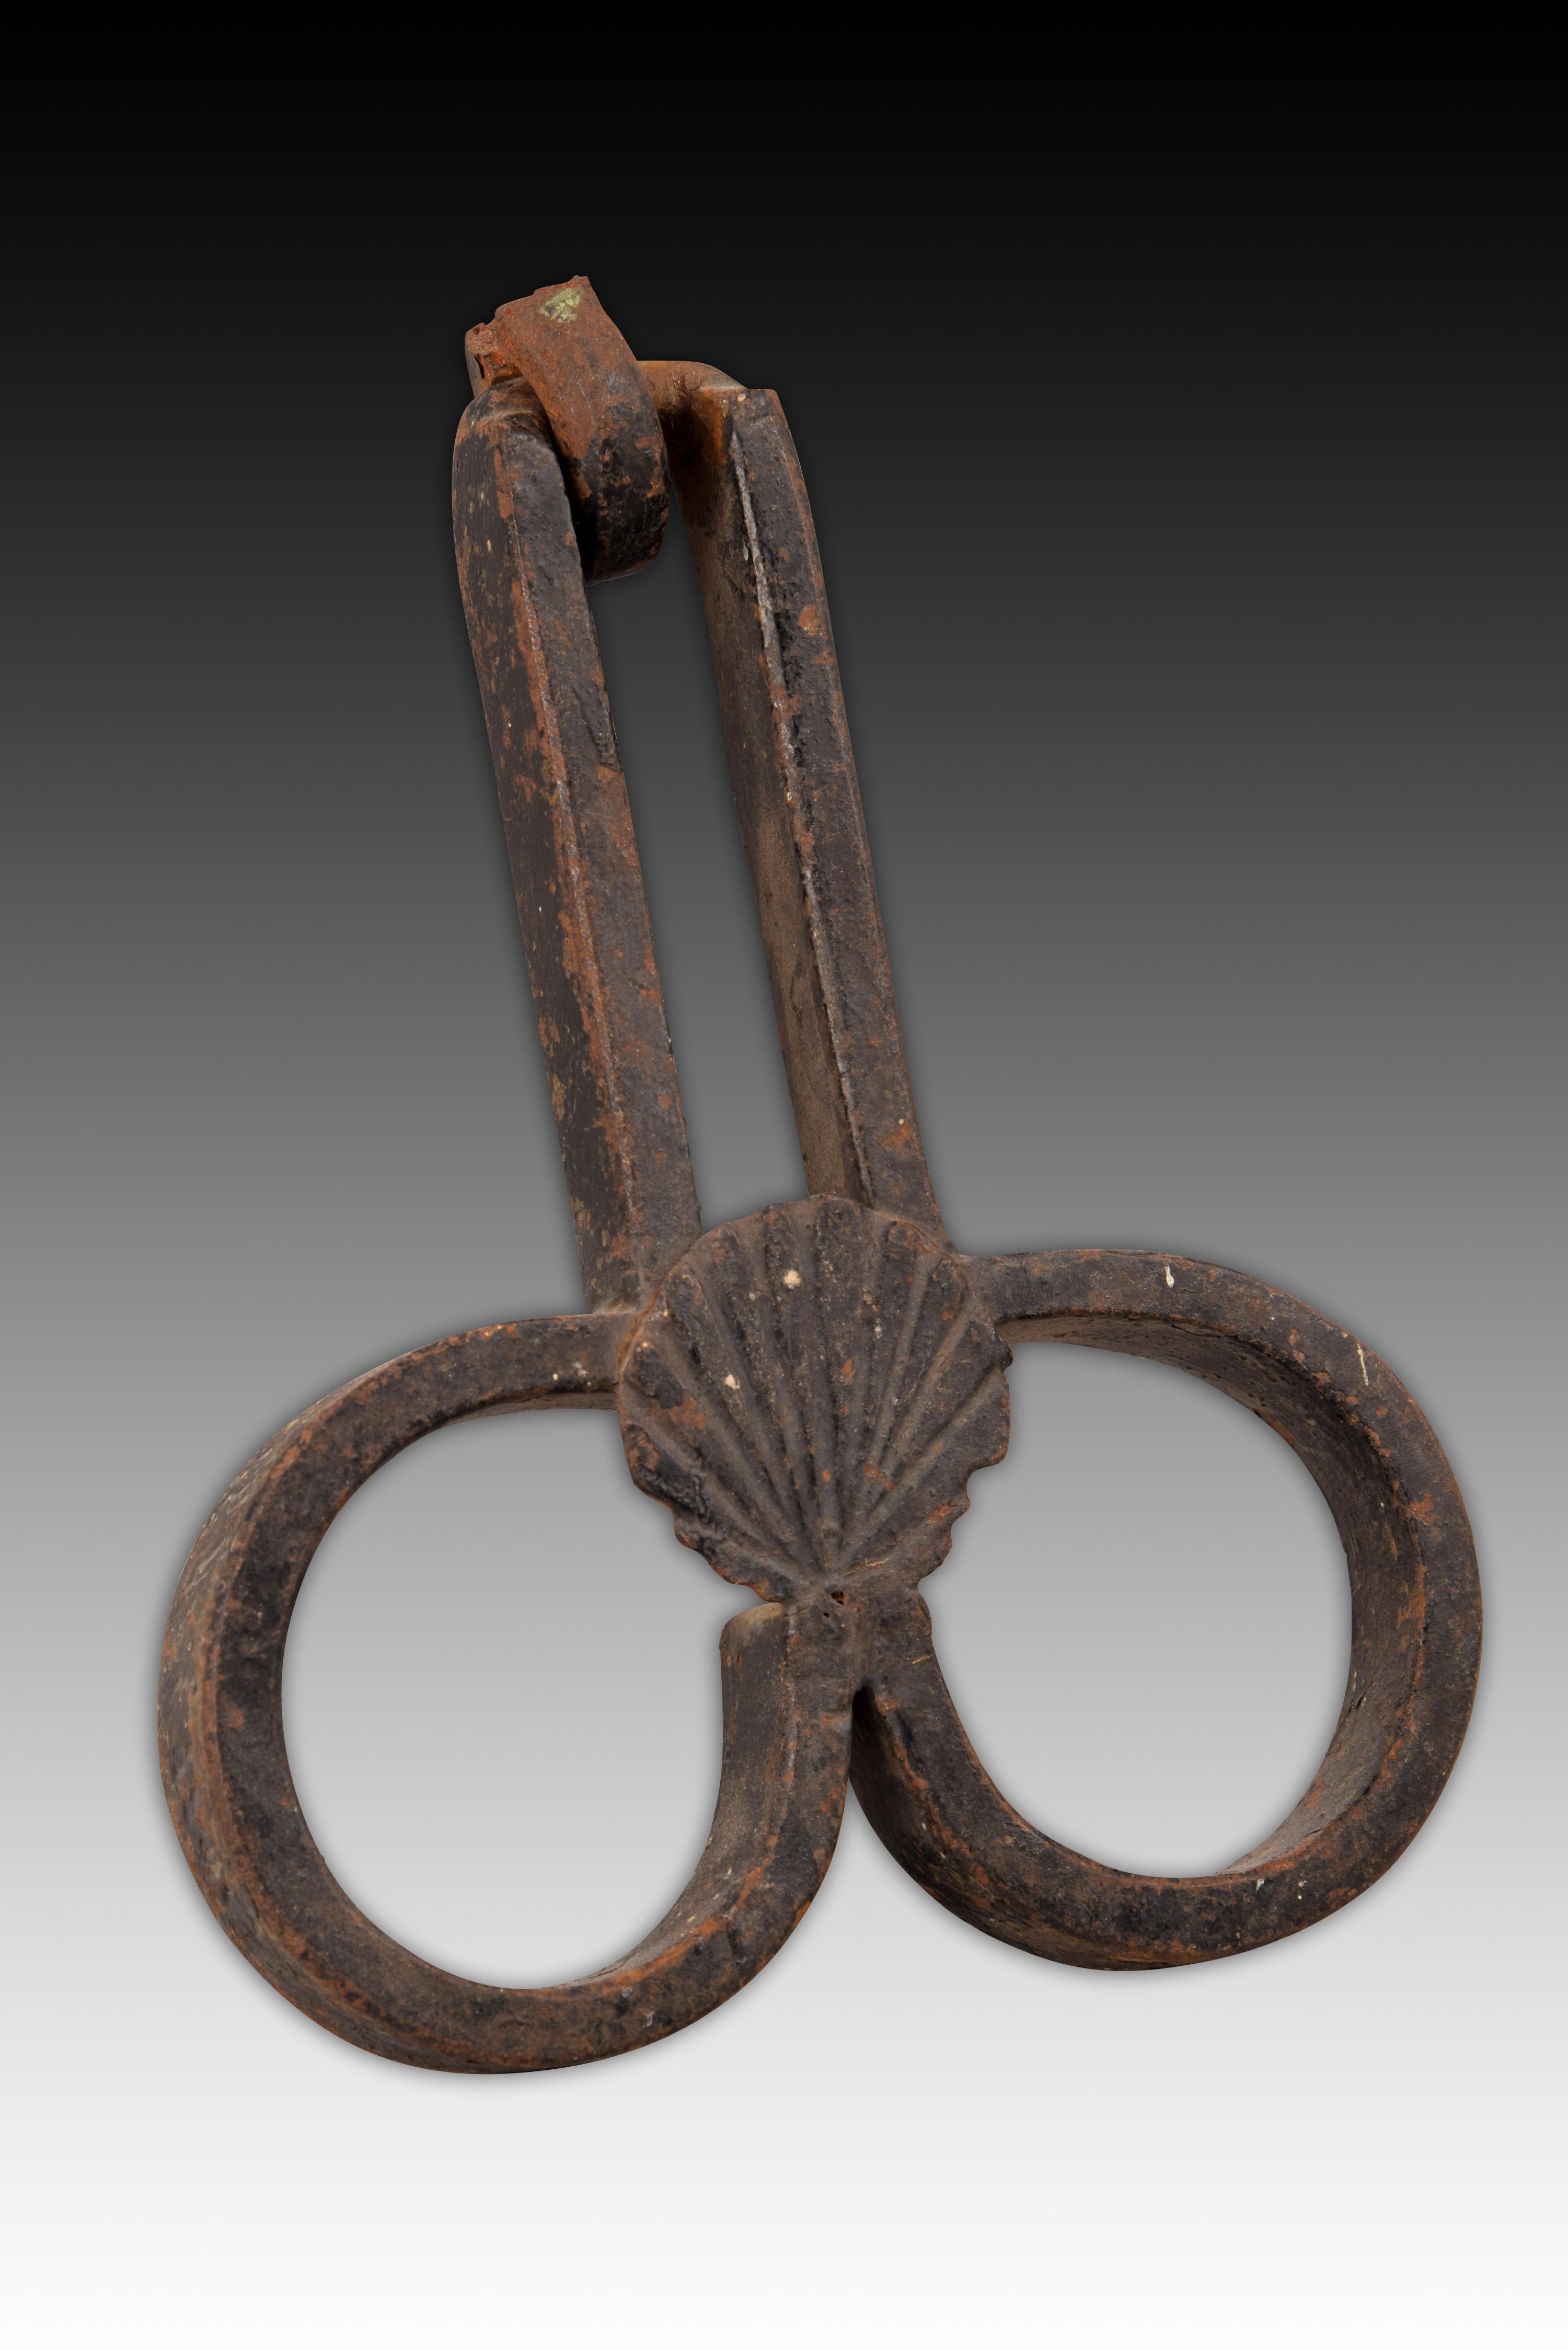 Shooter. Wrought iron, 16th century.
Handle made of wrought iron and formed by several pieces arranged in a particular way, which gives this type its name (scissor handle). The rectangular area and the two facing simple scrolls have been placed